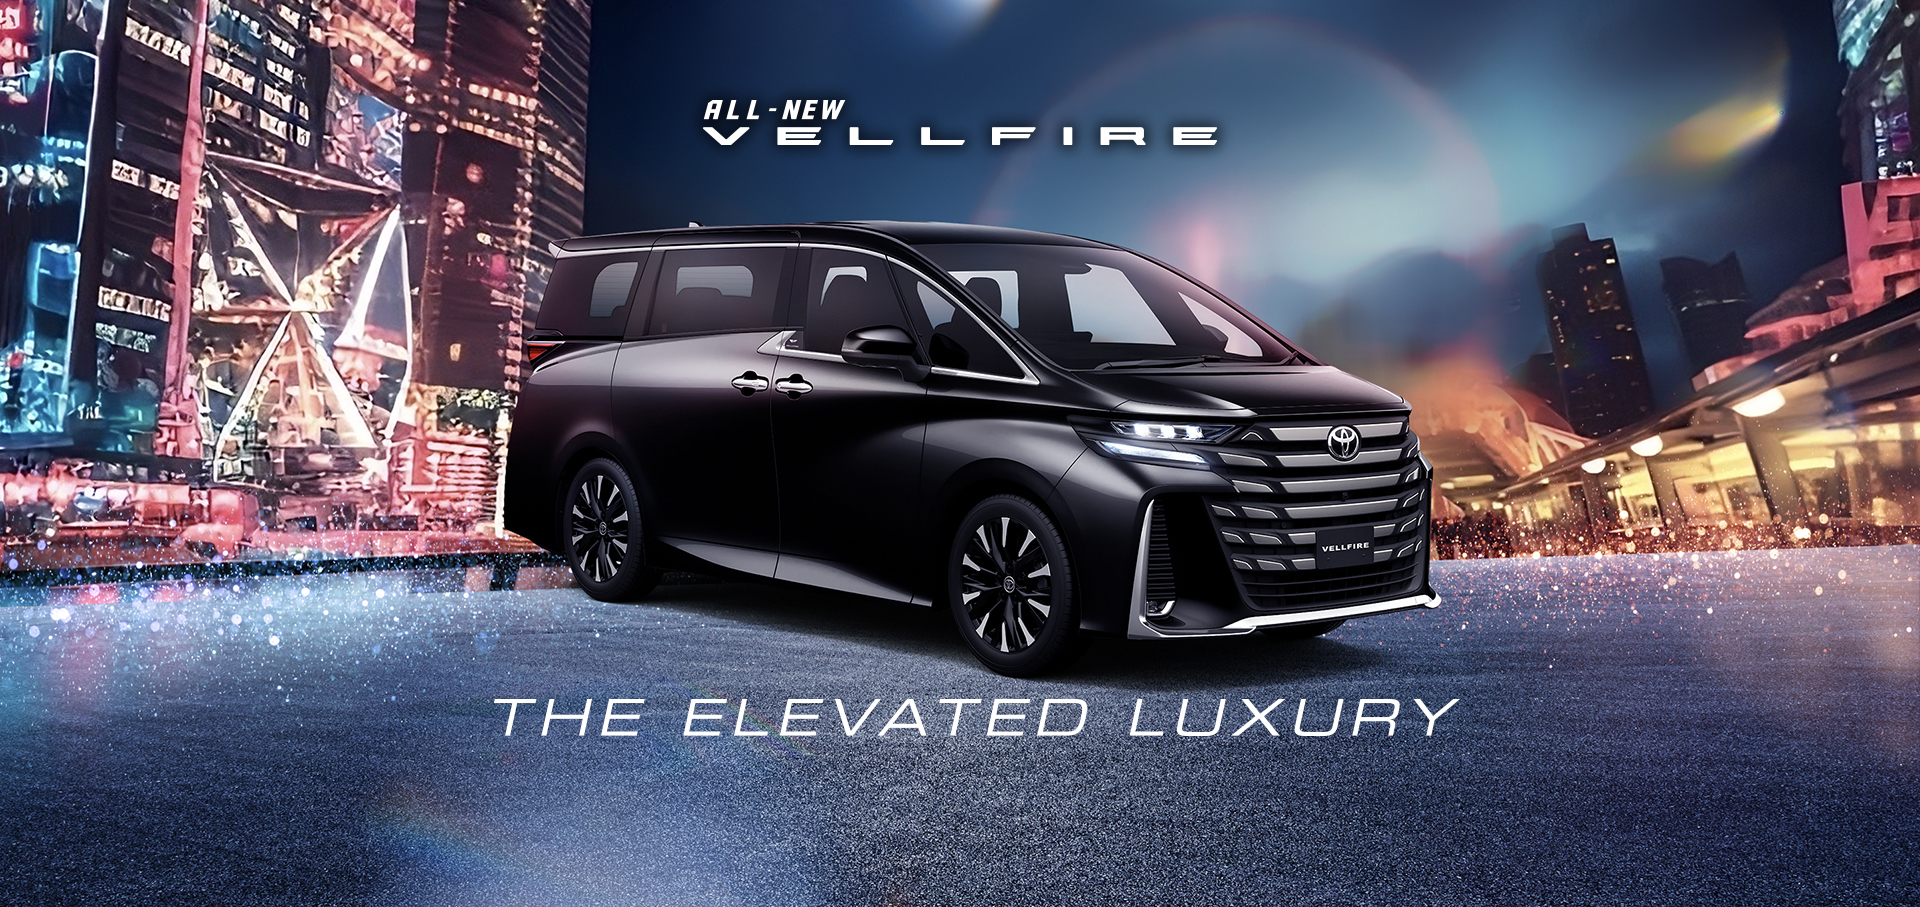 All-New Vellfire | Elevated Luxury | 7 Seater Cars | MPV